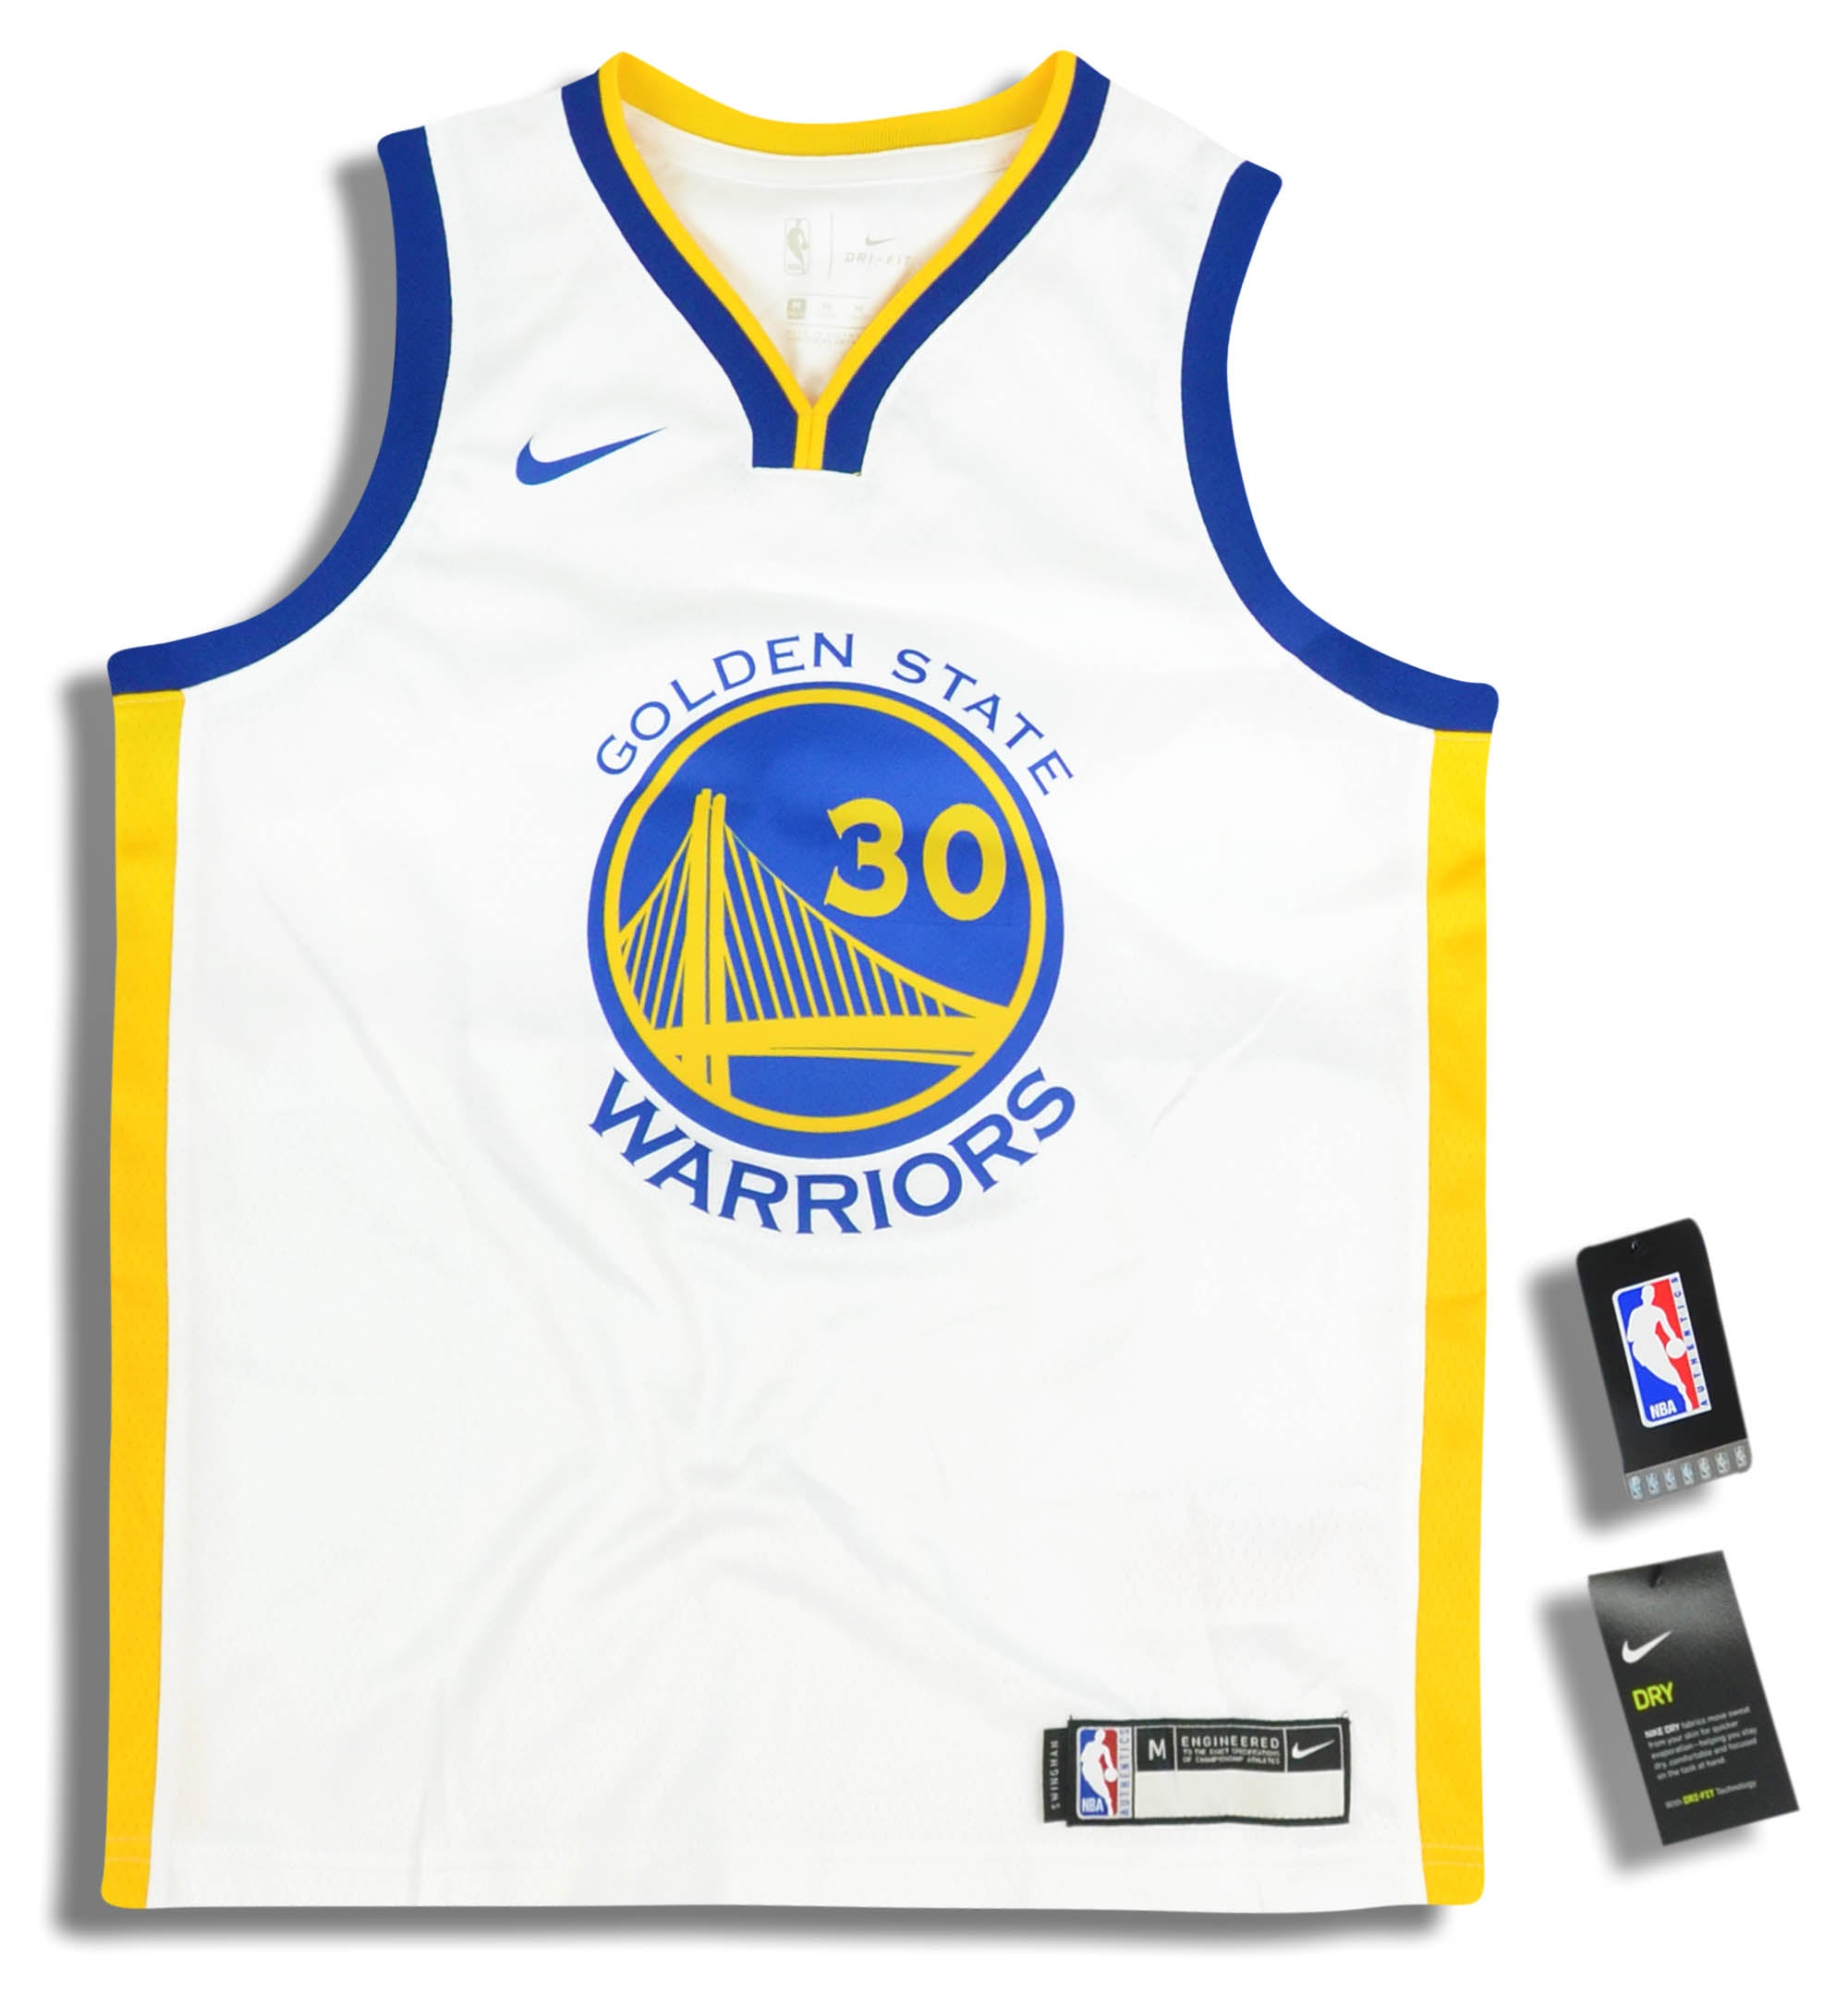 Nike Youth Golden State Warriors Stephen Curry #30 Blue Dri-FIT